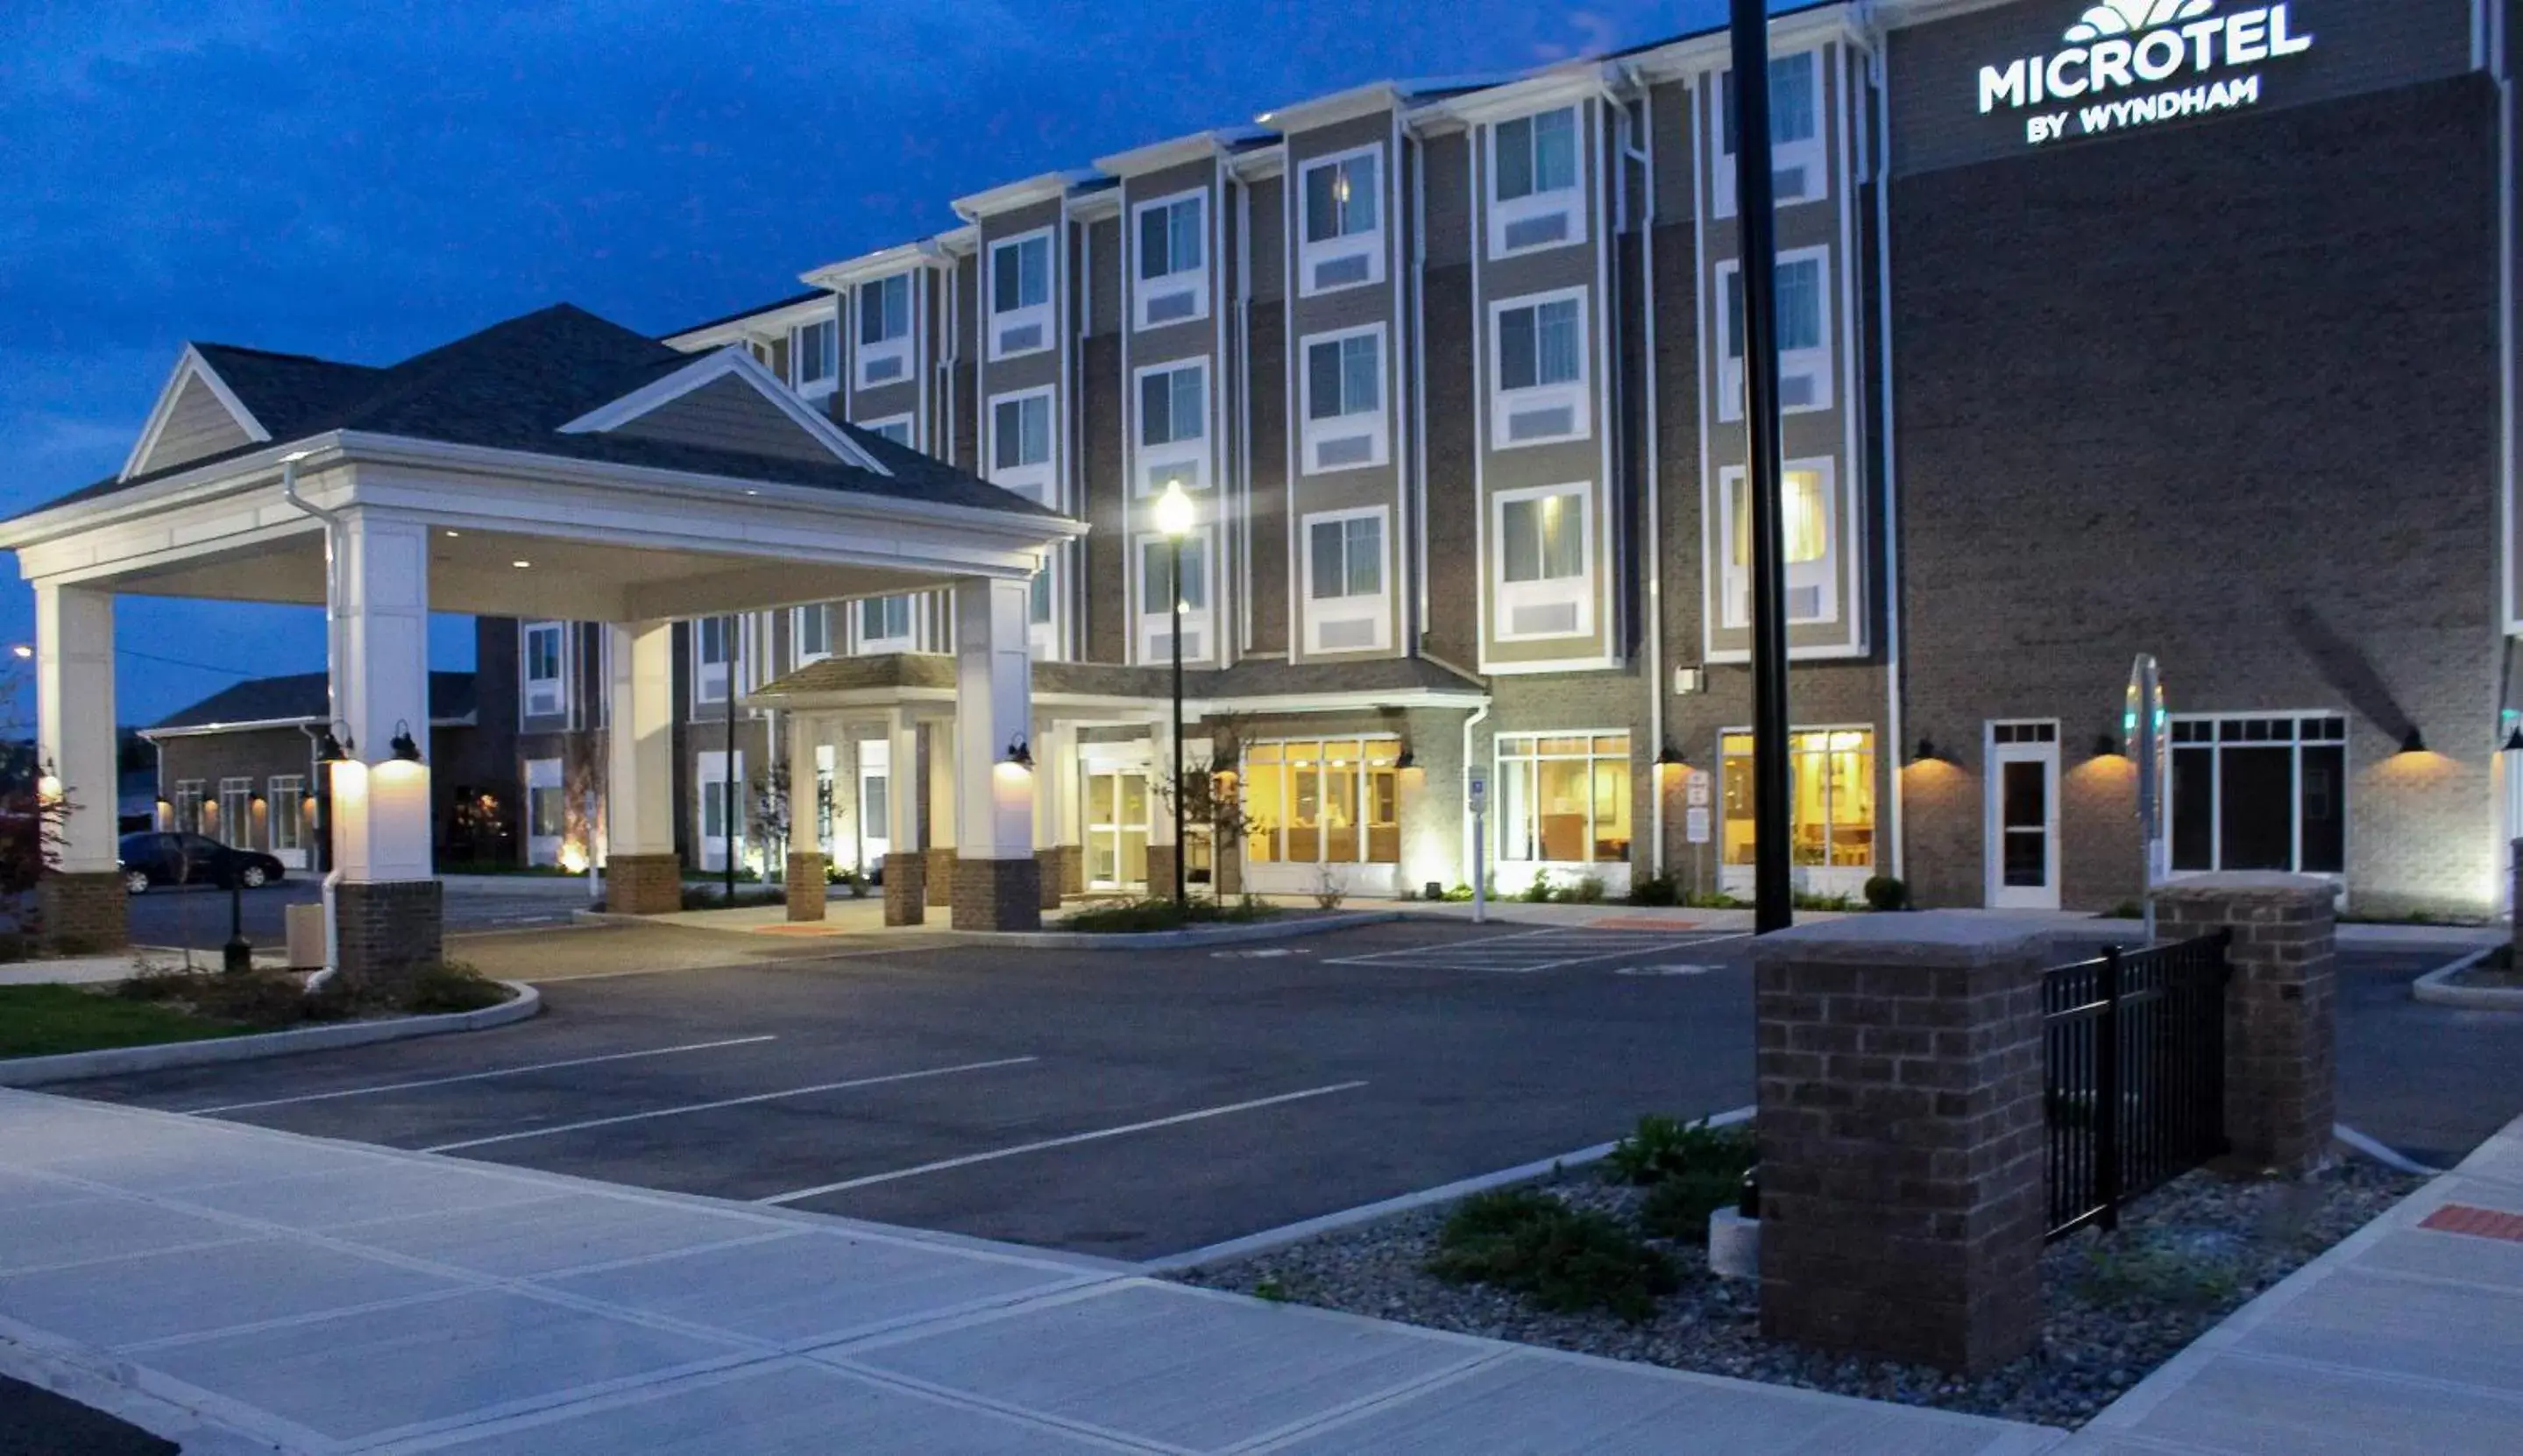 Facade/entrance, Property Building in Microtel Inn & Suites by Wyndham - Penn Yan